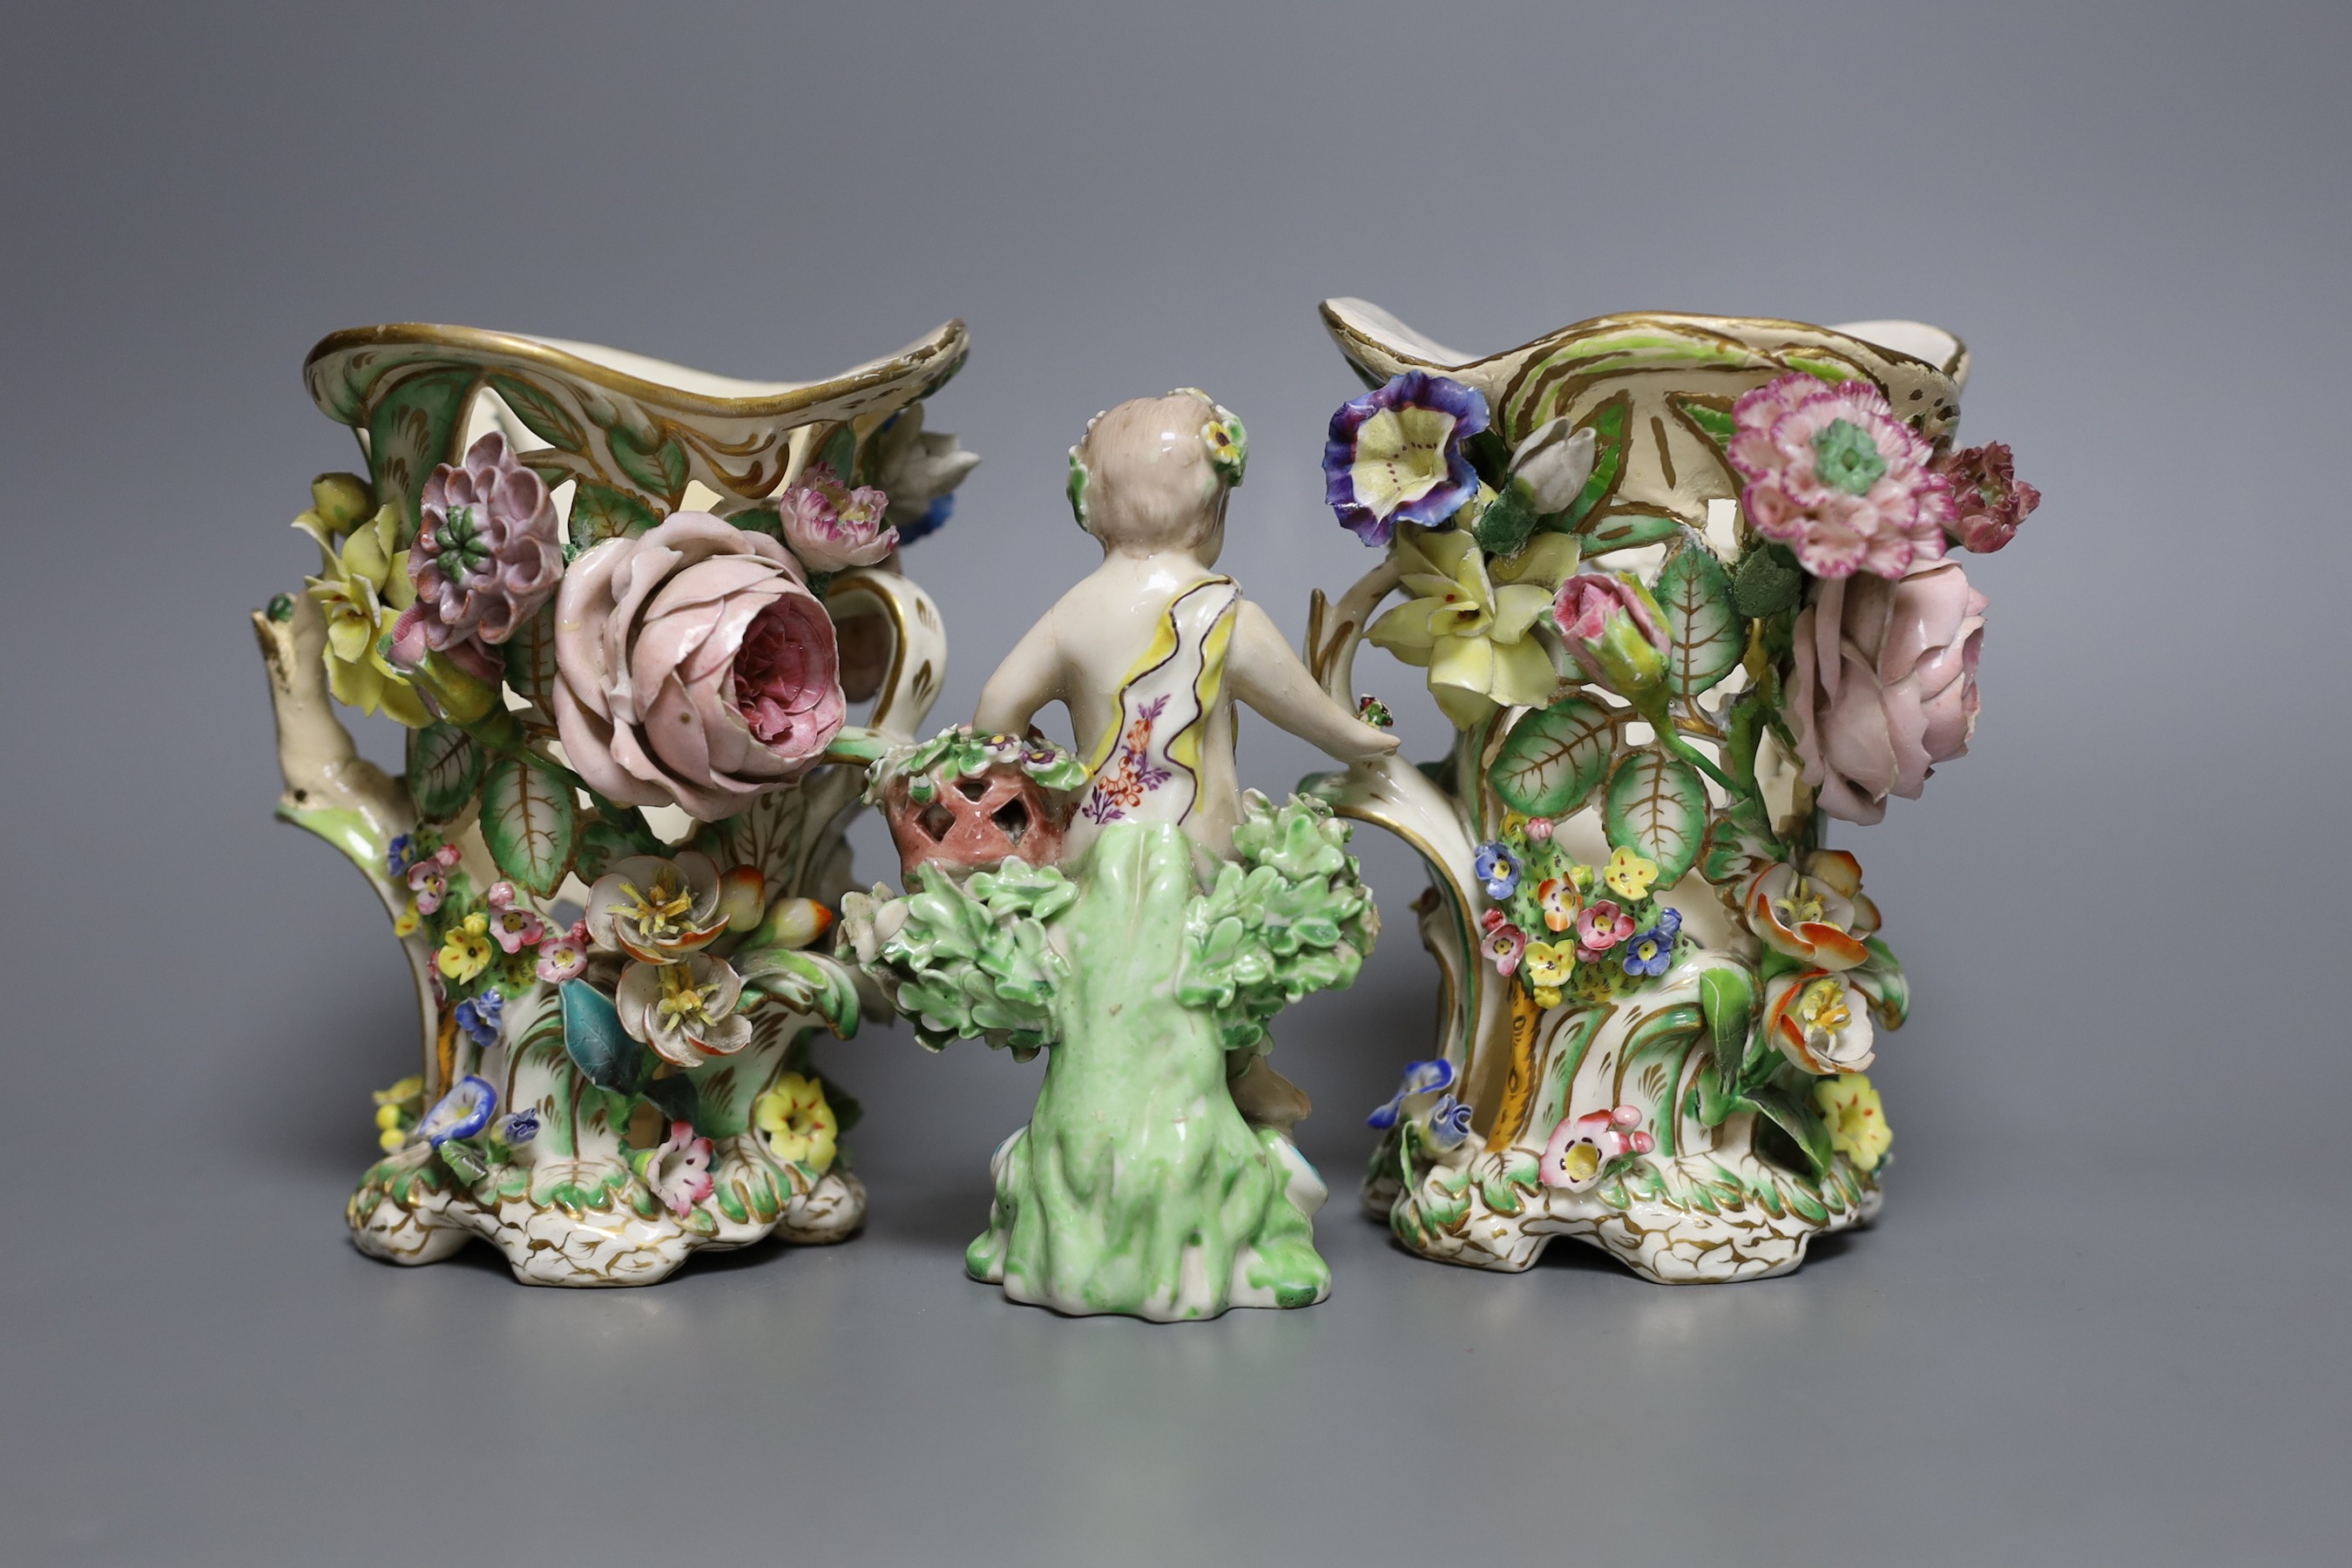 A 19th century Derby figure of a putti with flowers together with two floral encrusted porcelain vases, tallest 14cm